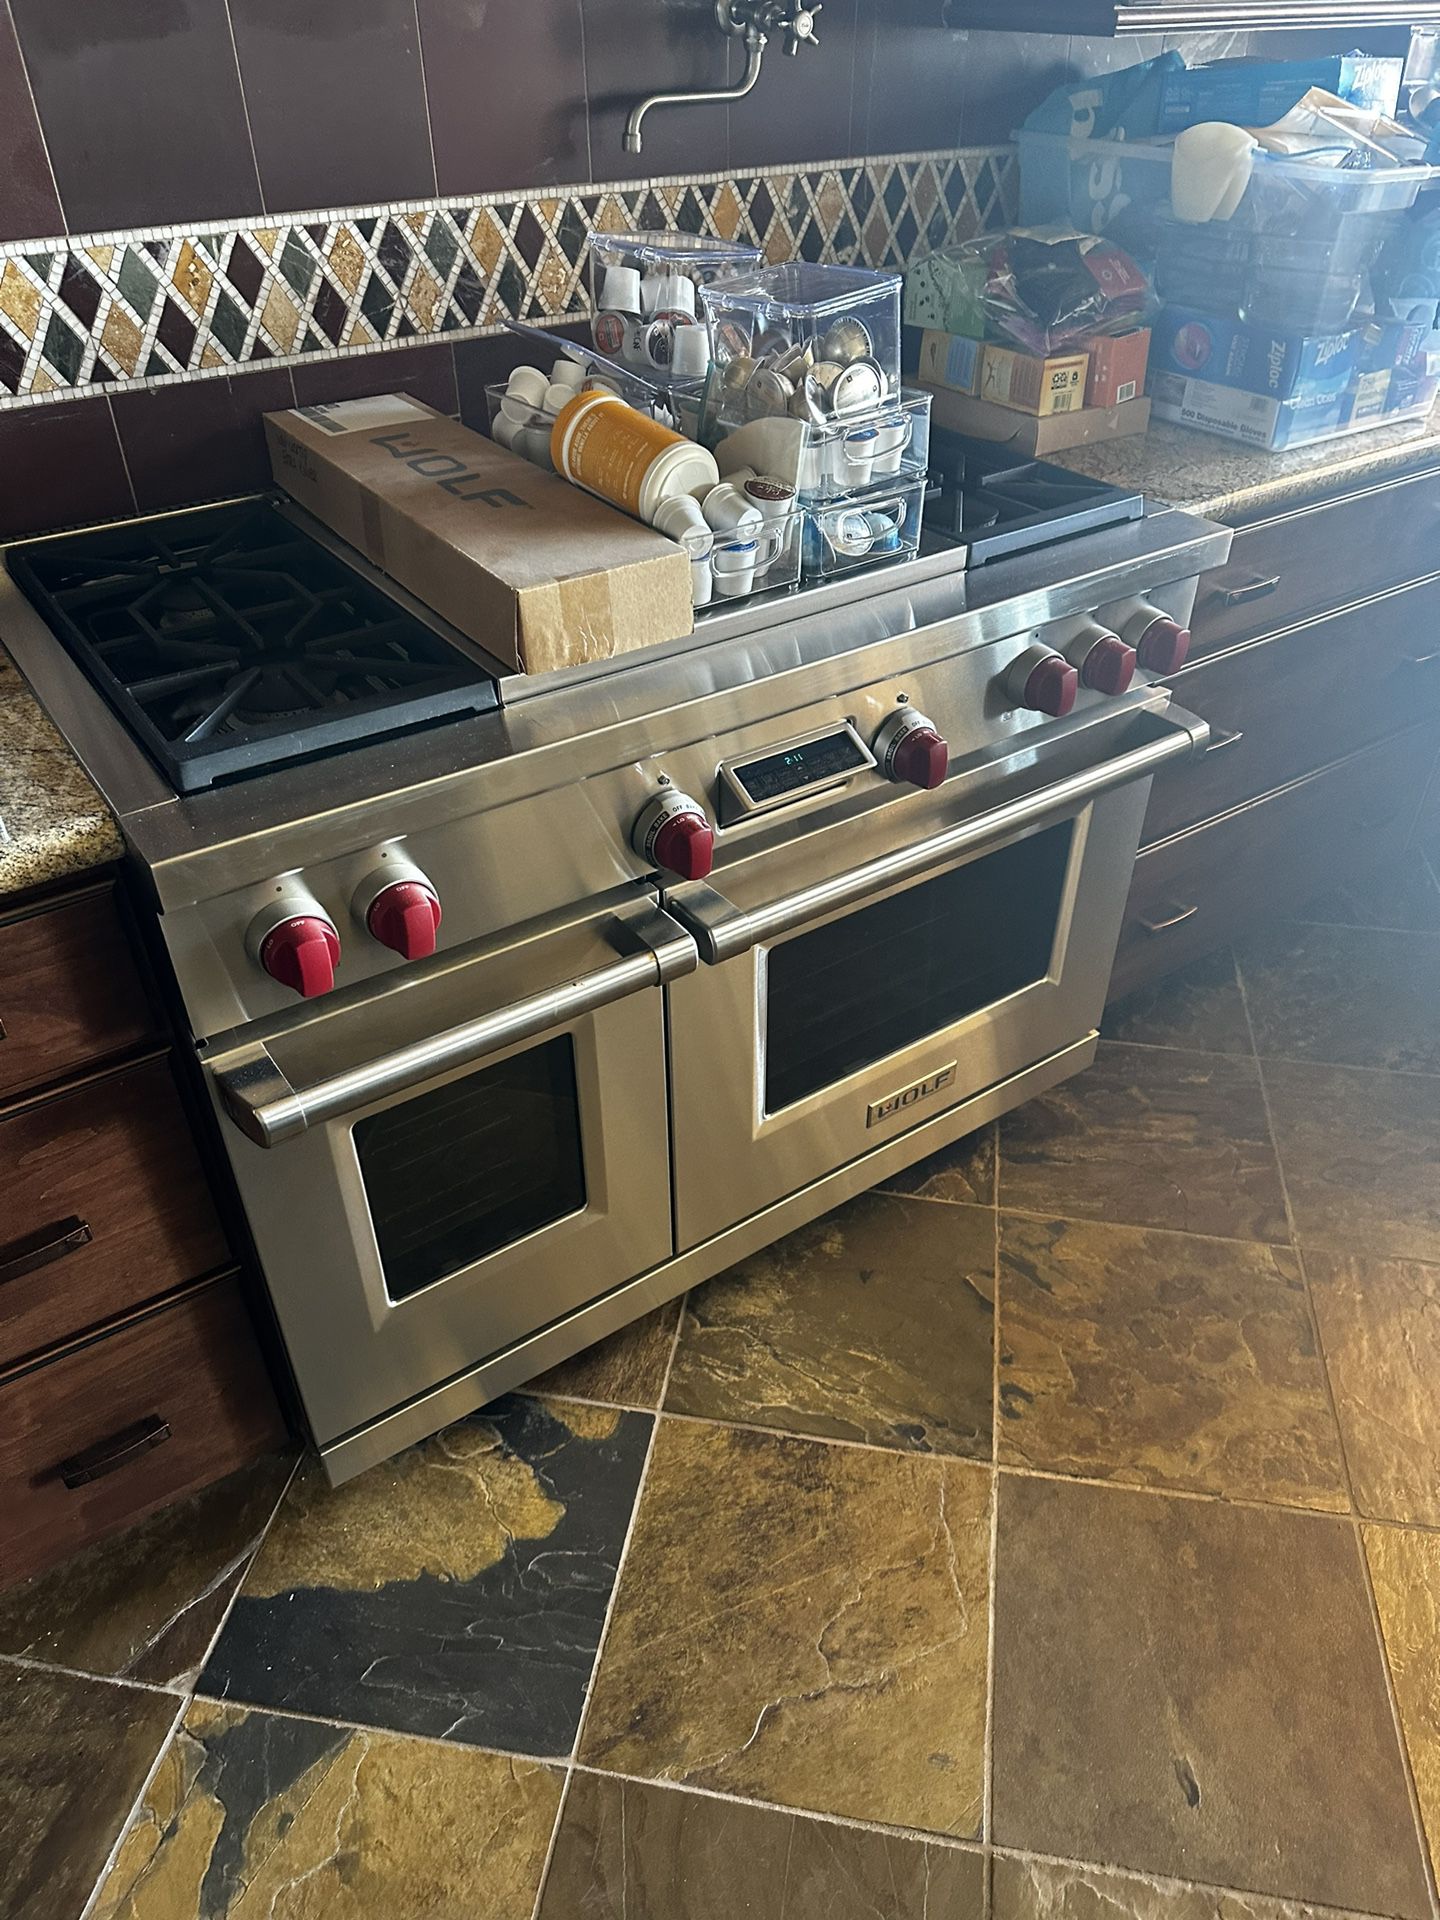 WOLF 48" Dual Fuel Range, 4 Burners and French Top, Stainless Steel 🌵 REMODELING NEED GONE🌵